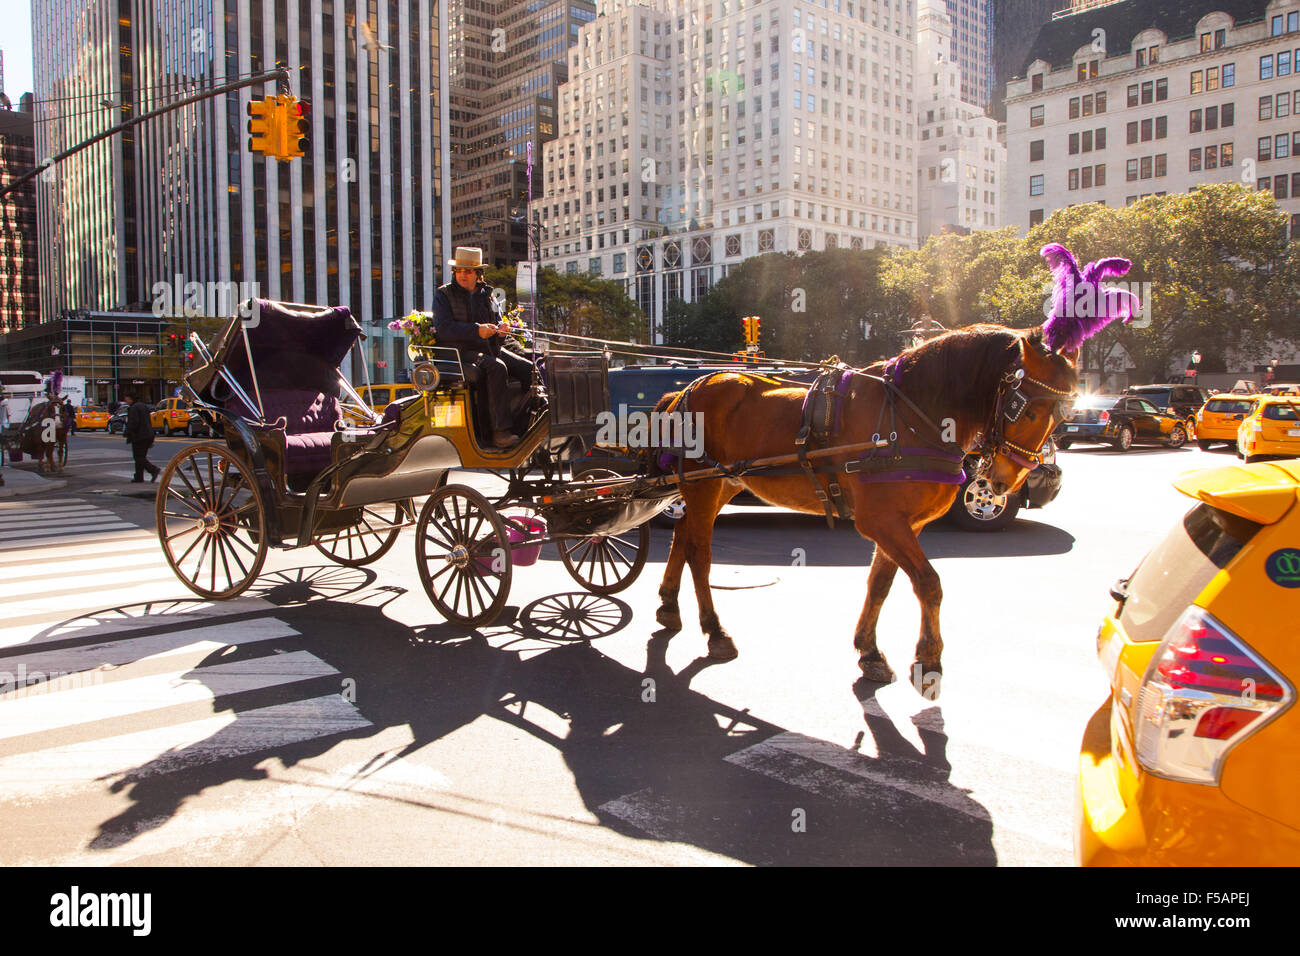 Central Park horse and carriage waiting to pick up a customer .W 59th Street, New York City, United States of America. Stock Photo